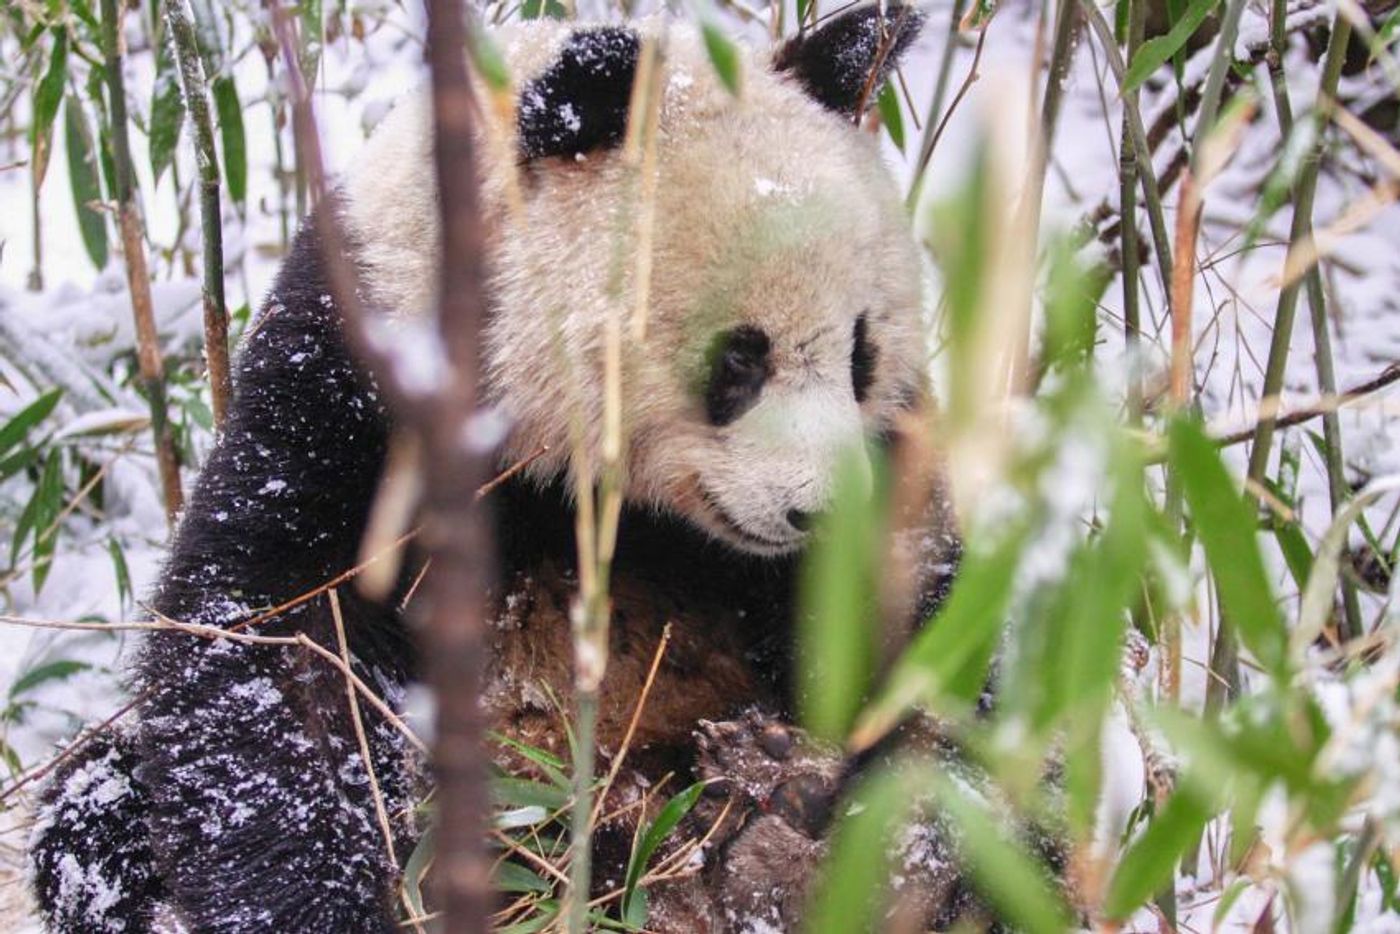 A giant panda is seen eating bamboo.